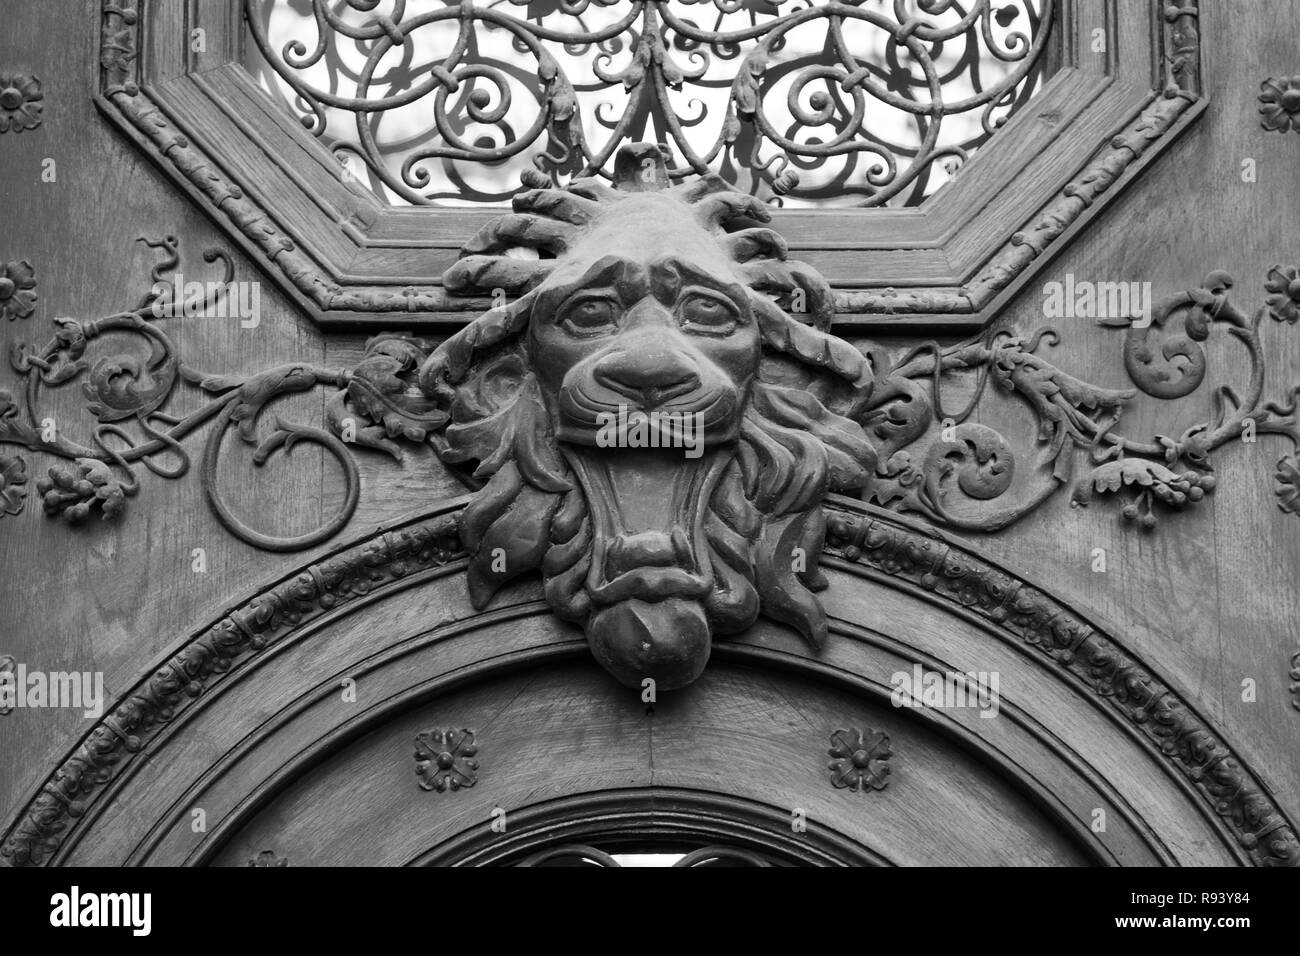 brass lion head on the door, black and white. Stock Photo